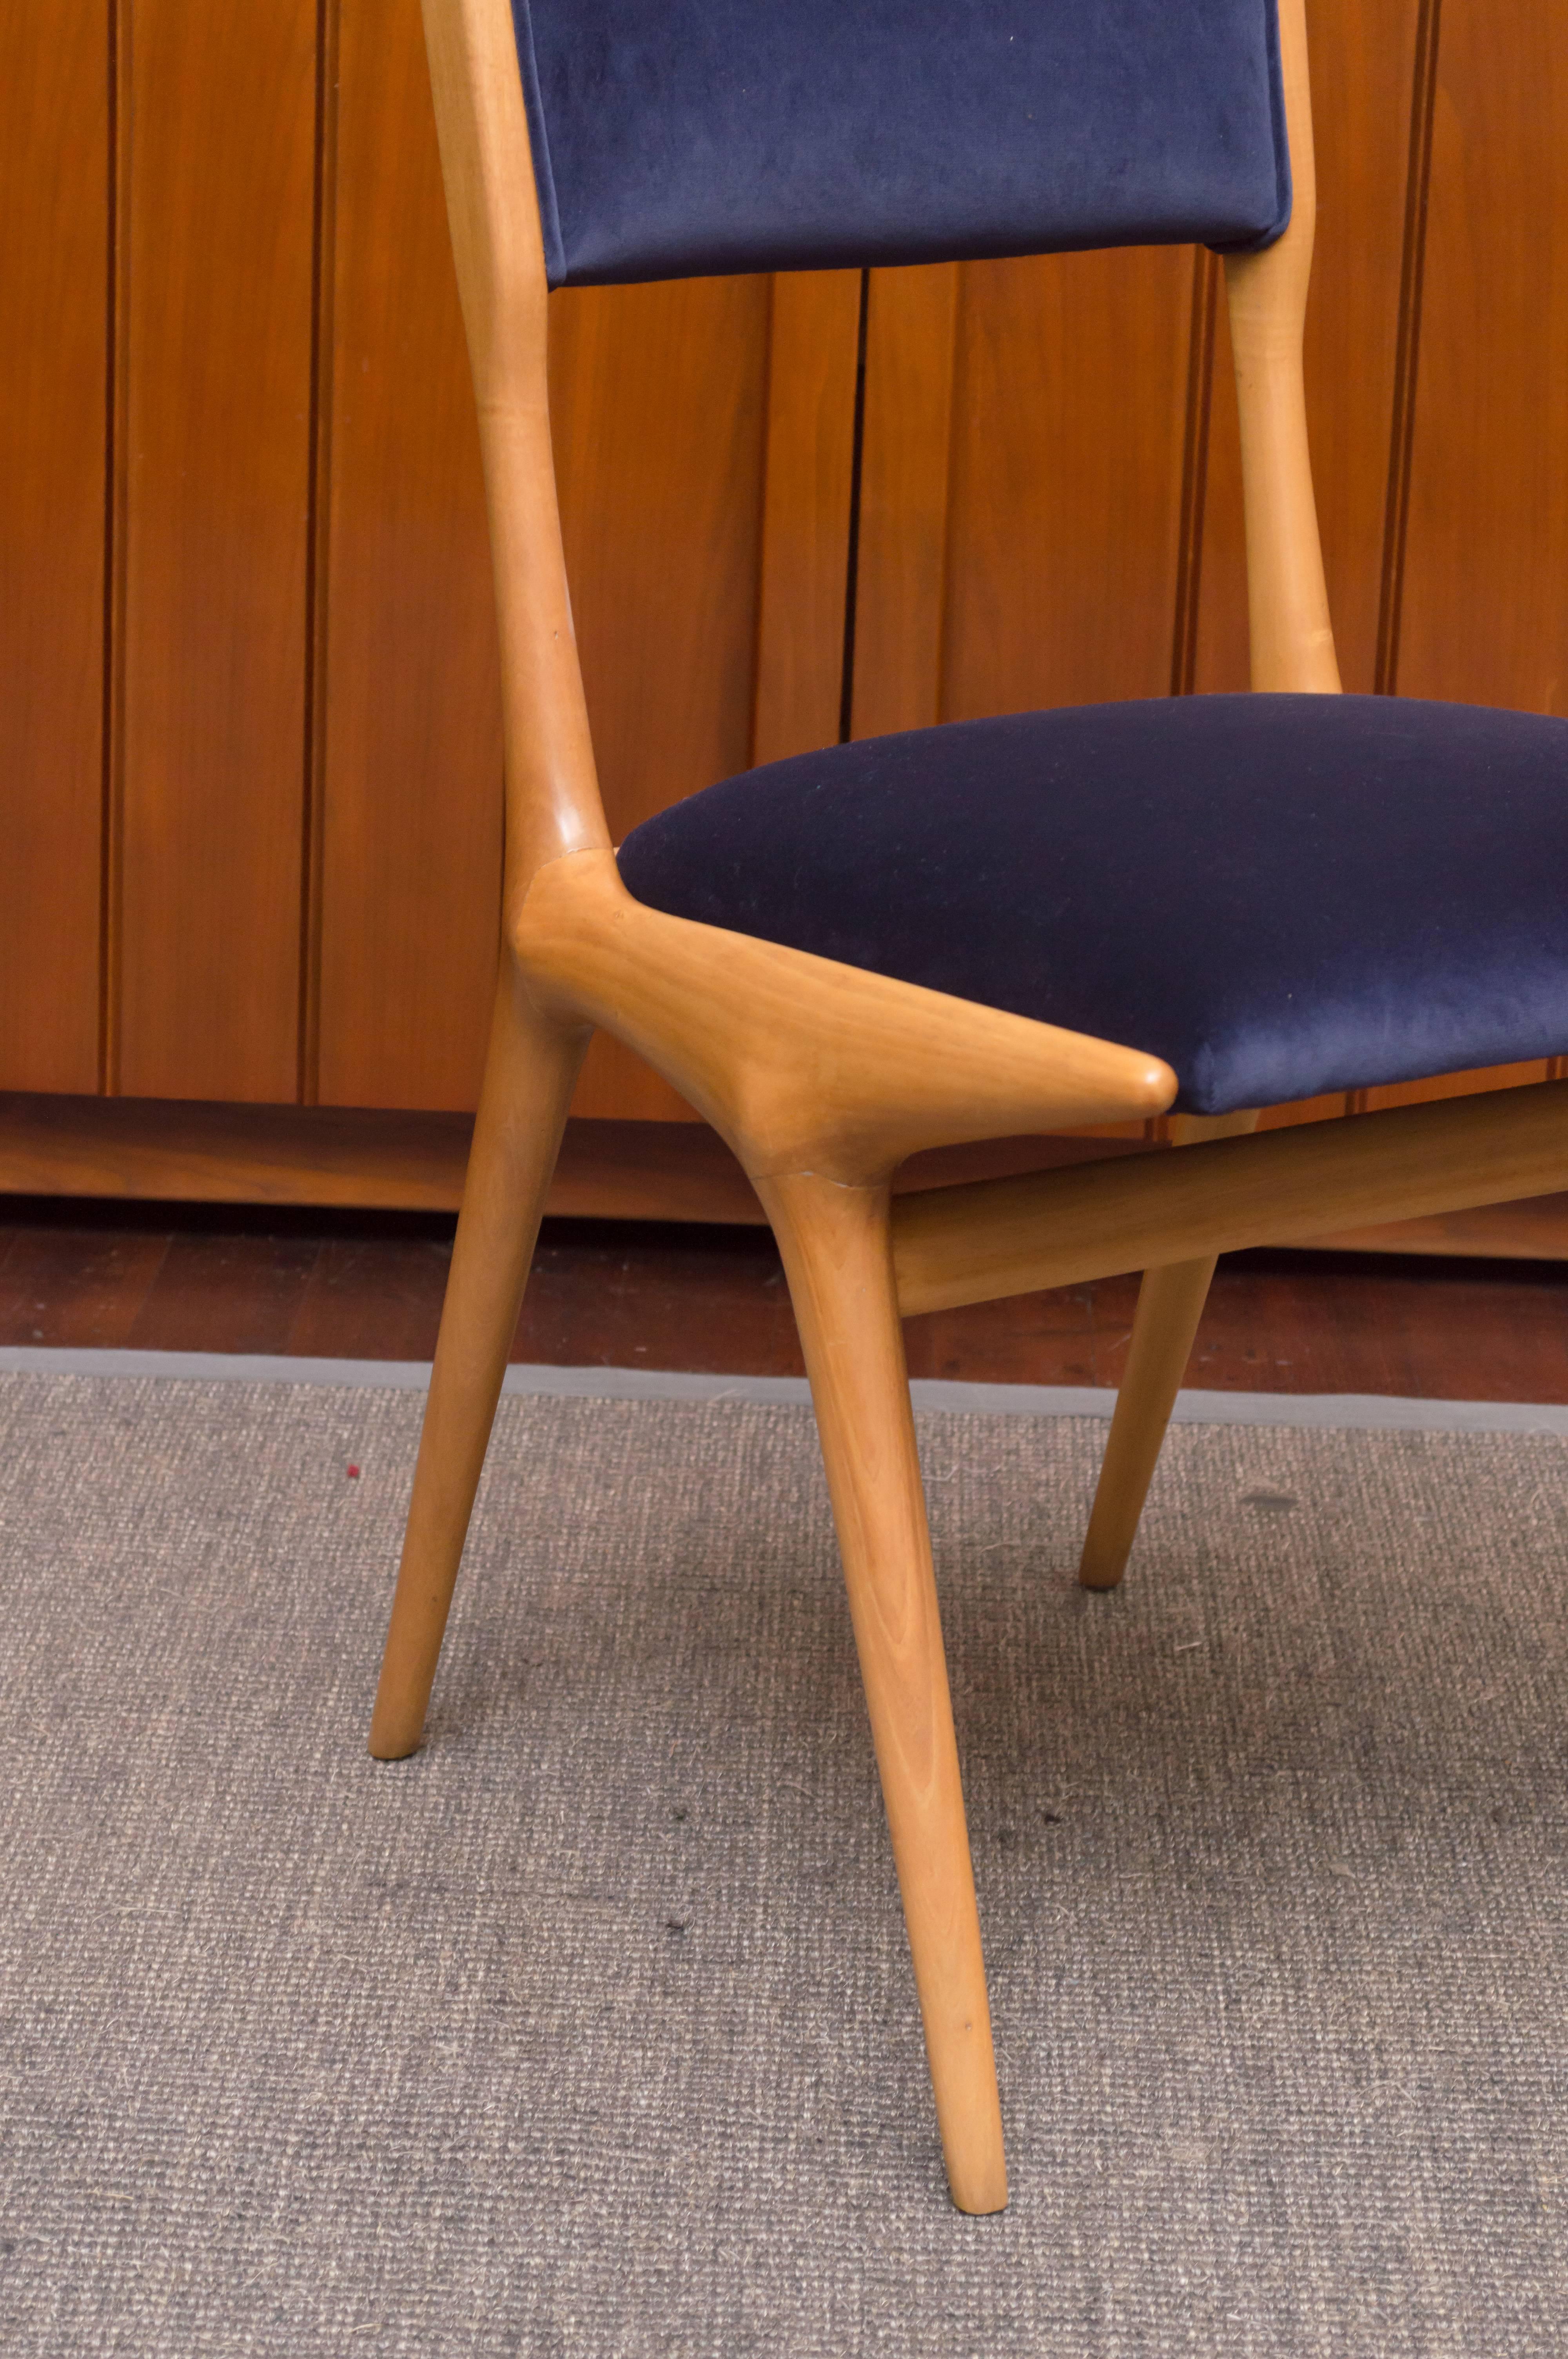 Carlo di Carli design side chair made out of cherrywood and newly refinished and upholstered in Navy velvet.